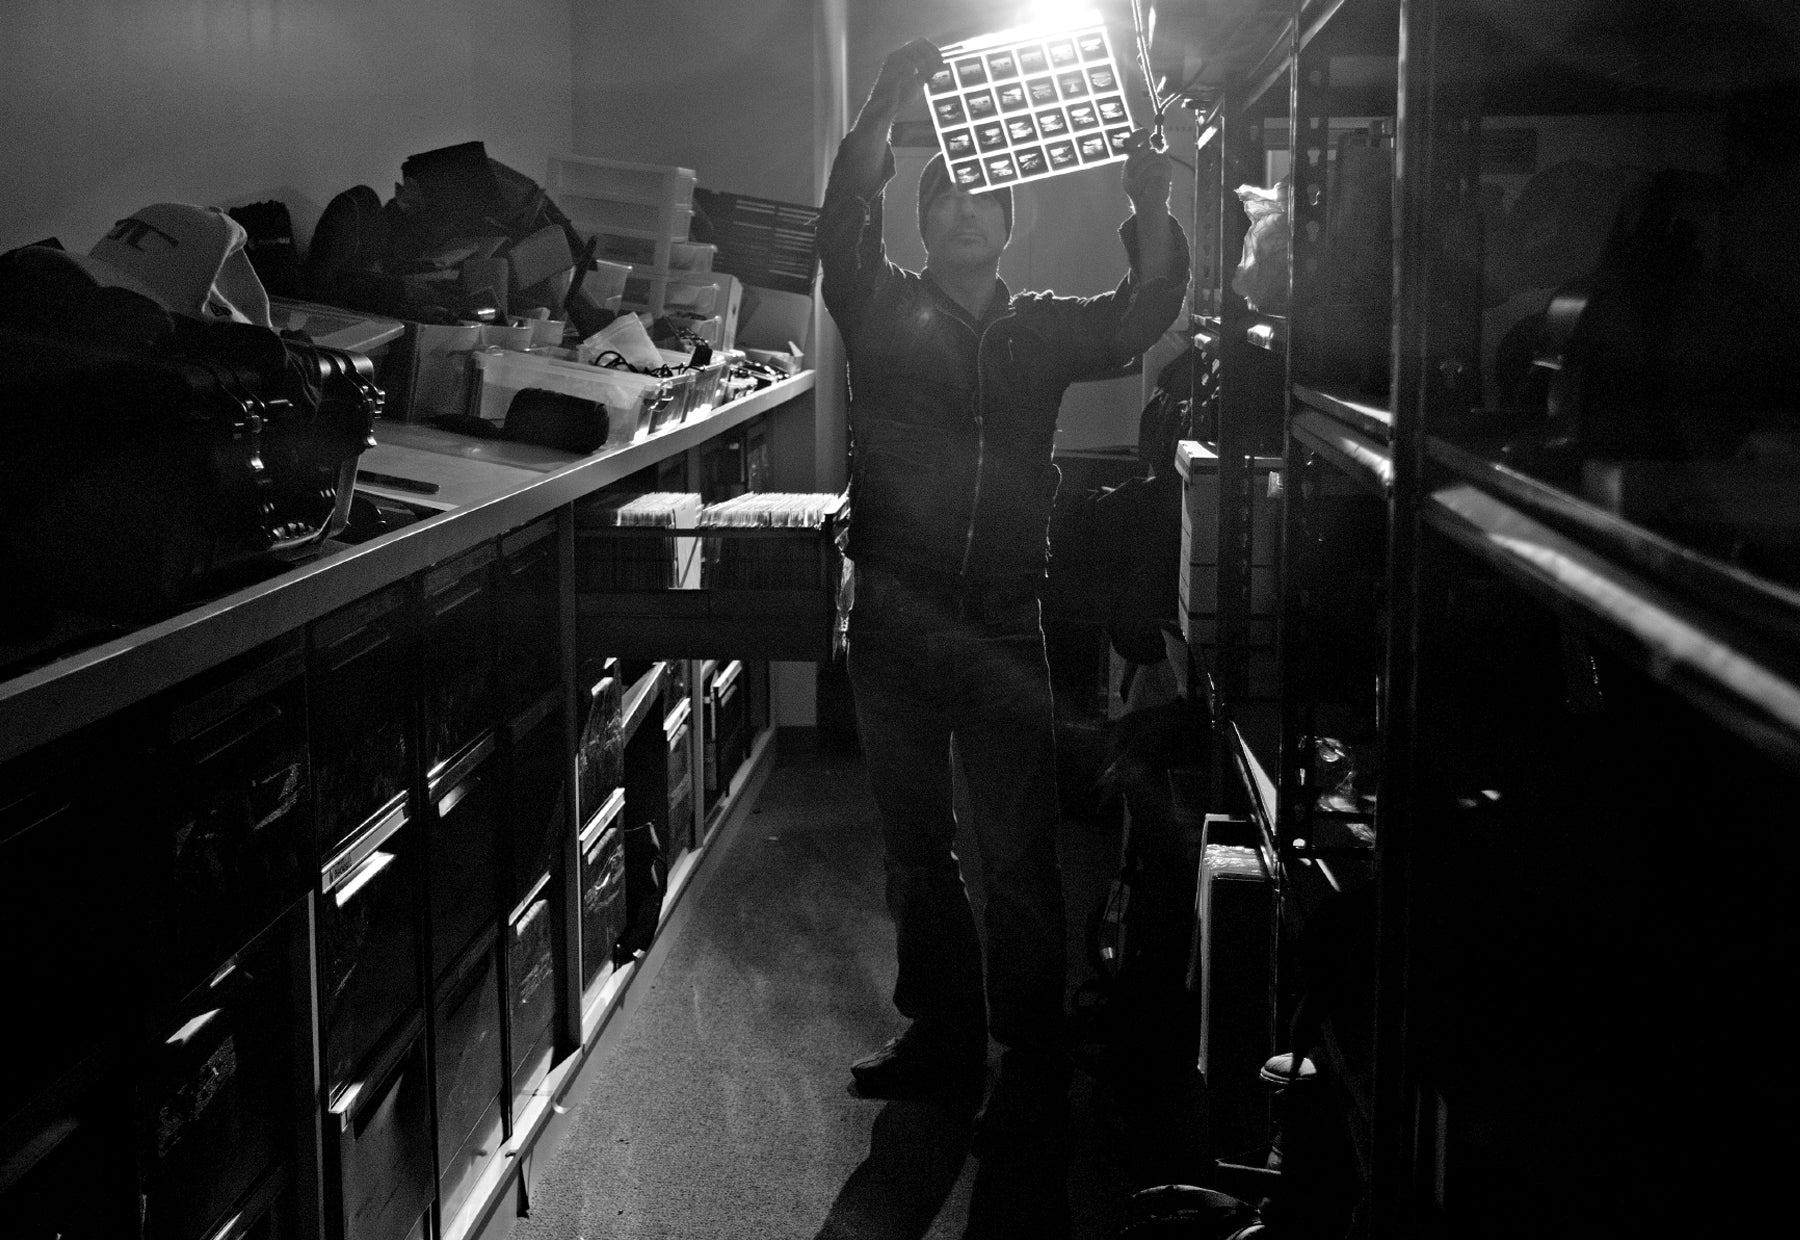 Backlit black and white portrait of Peter Lik wearing a black leather jacket and beanie viewing a sleeve of transparency slides standing in storage closet